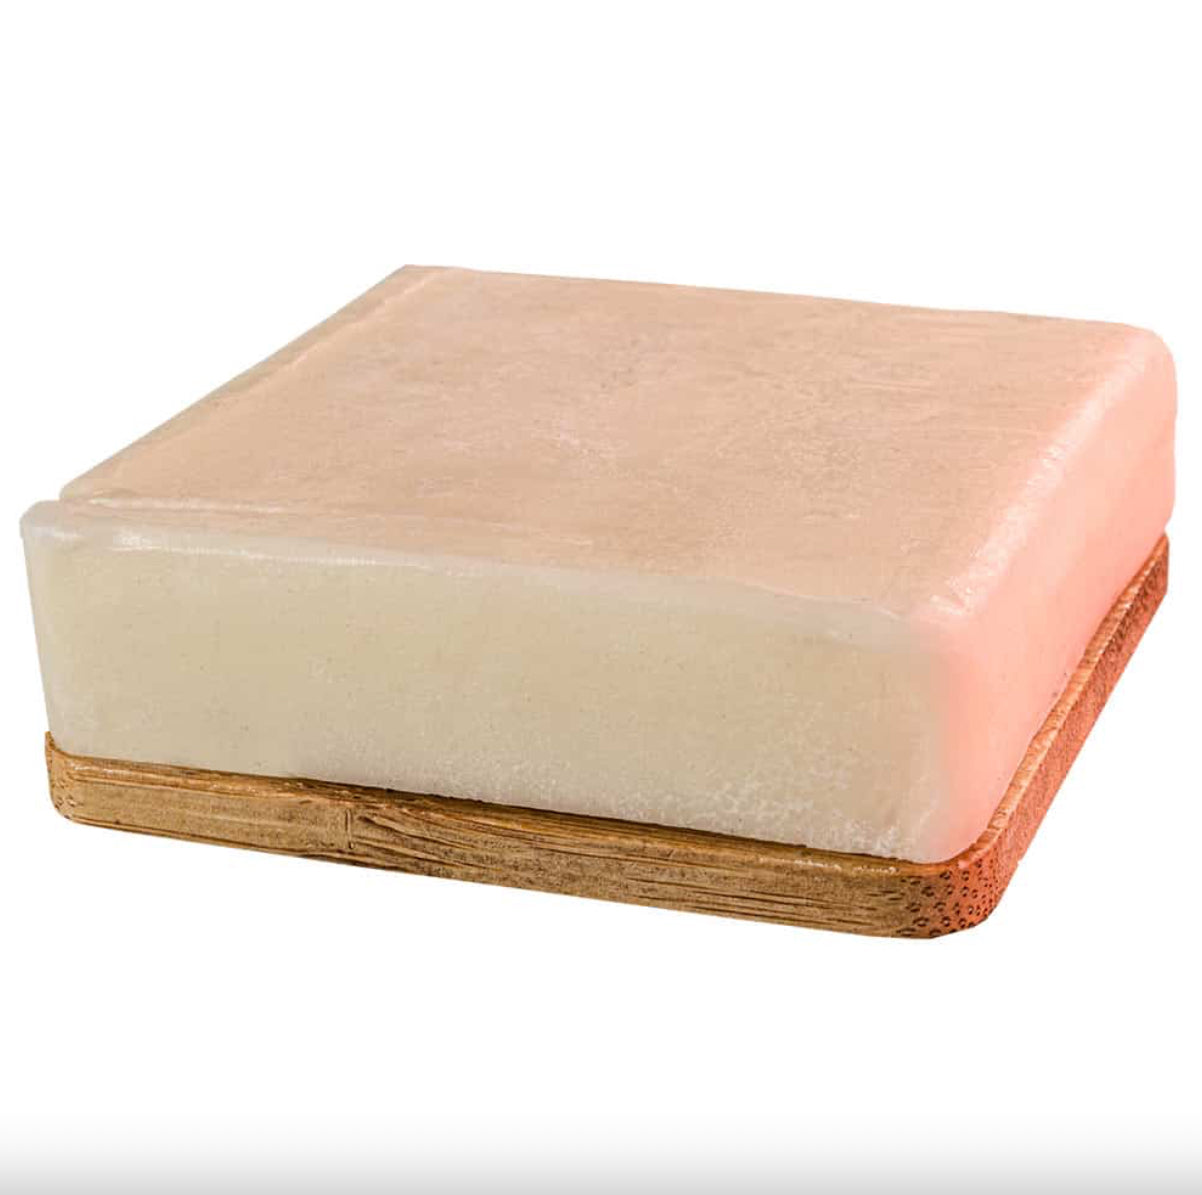 BODY OIL BAR WITH BAMBOO WAFER